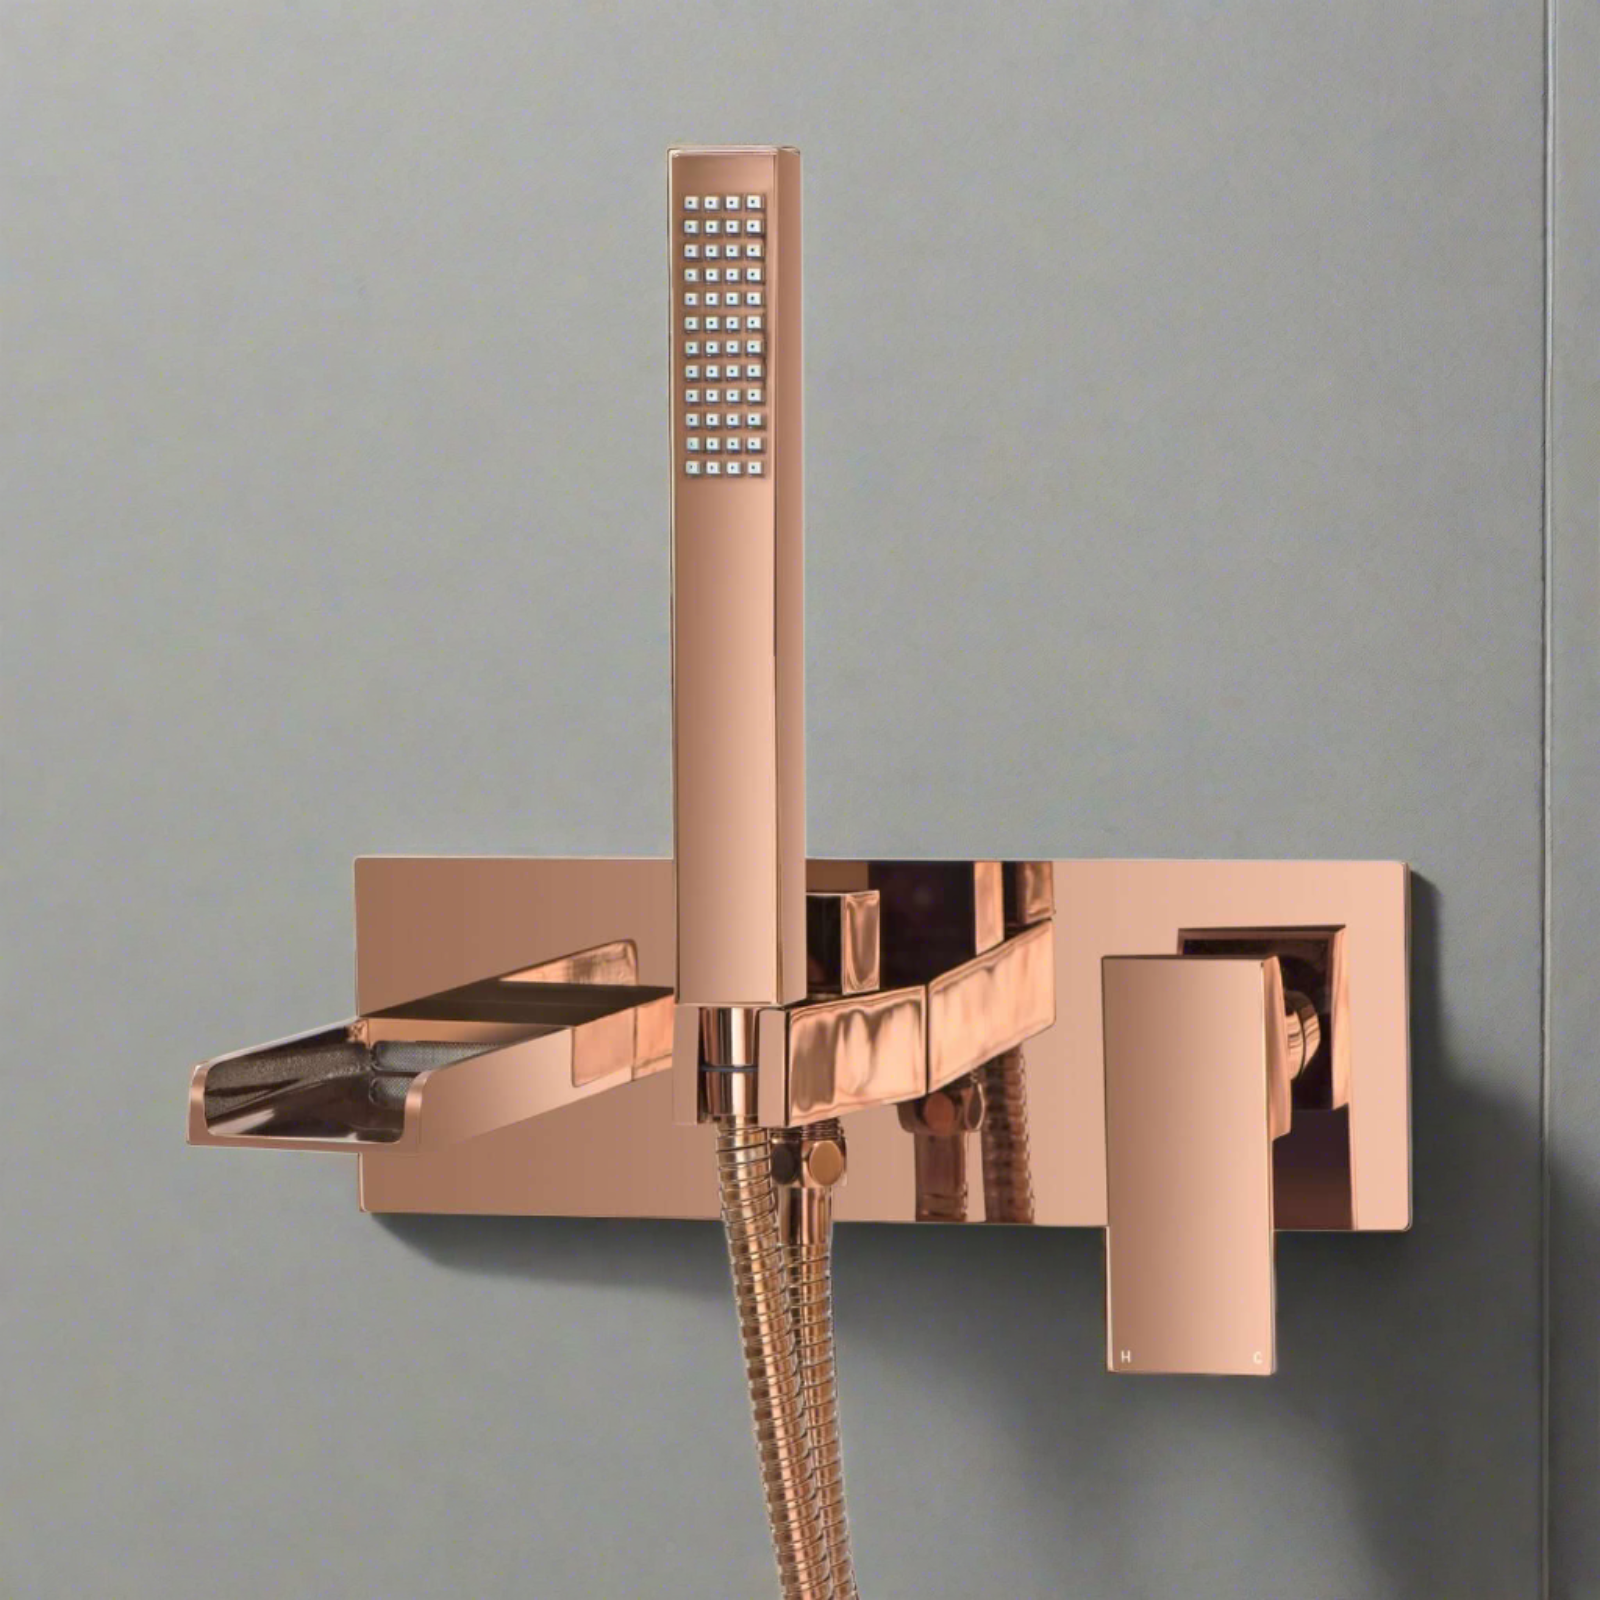 Plaza wall mounted shower mixer - rose gold